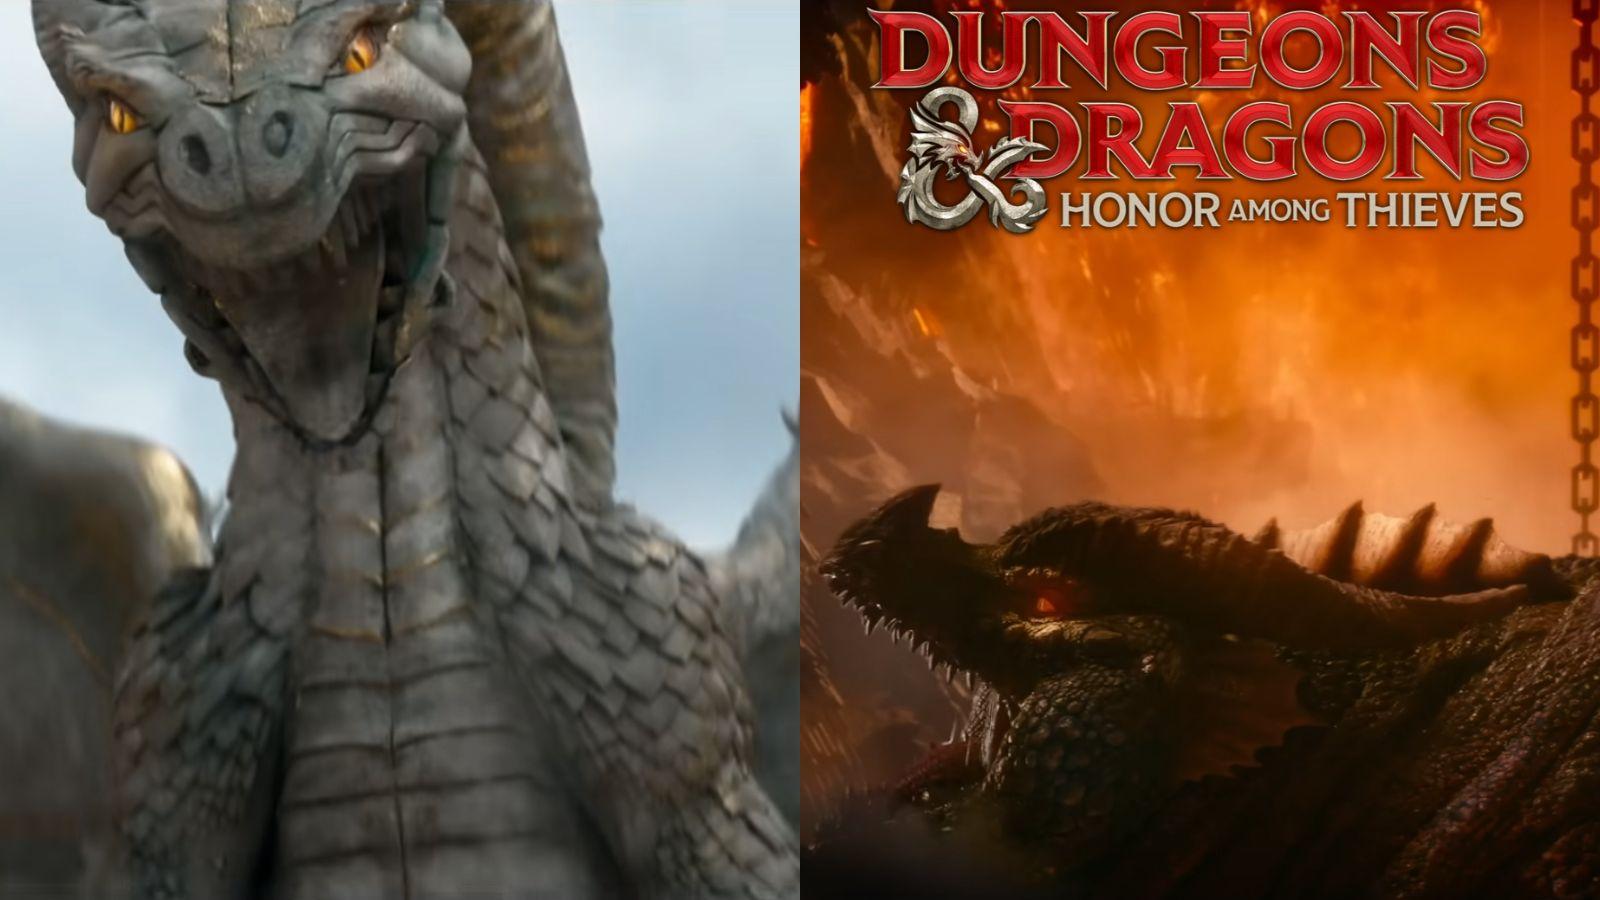 What Monsters Were in the New Dungeons & Dragons Trailer?